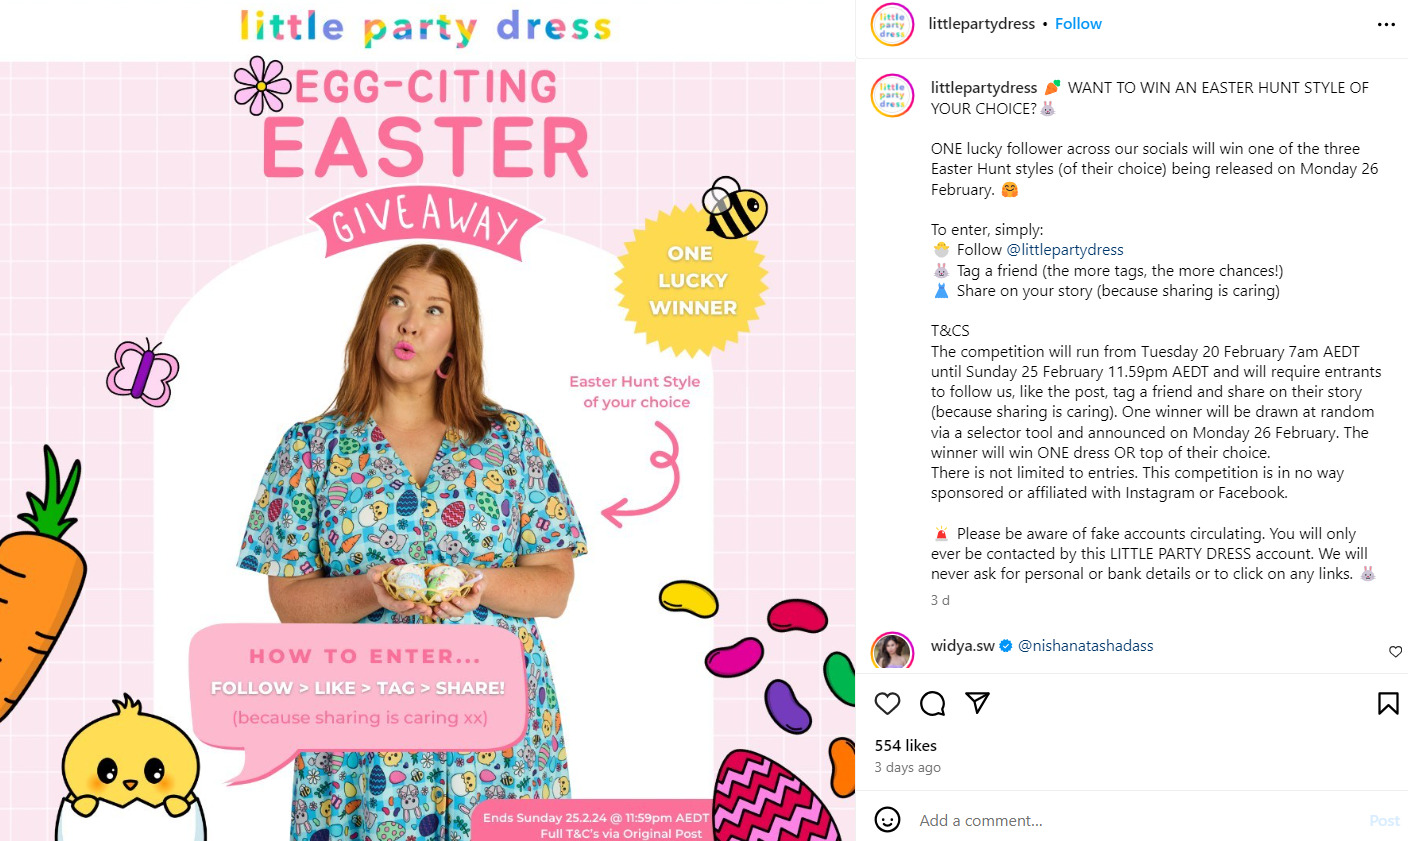 Little Party Dress's Instagram post promoting their Easter-themed social media contest.